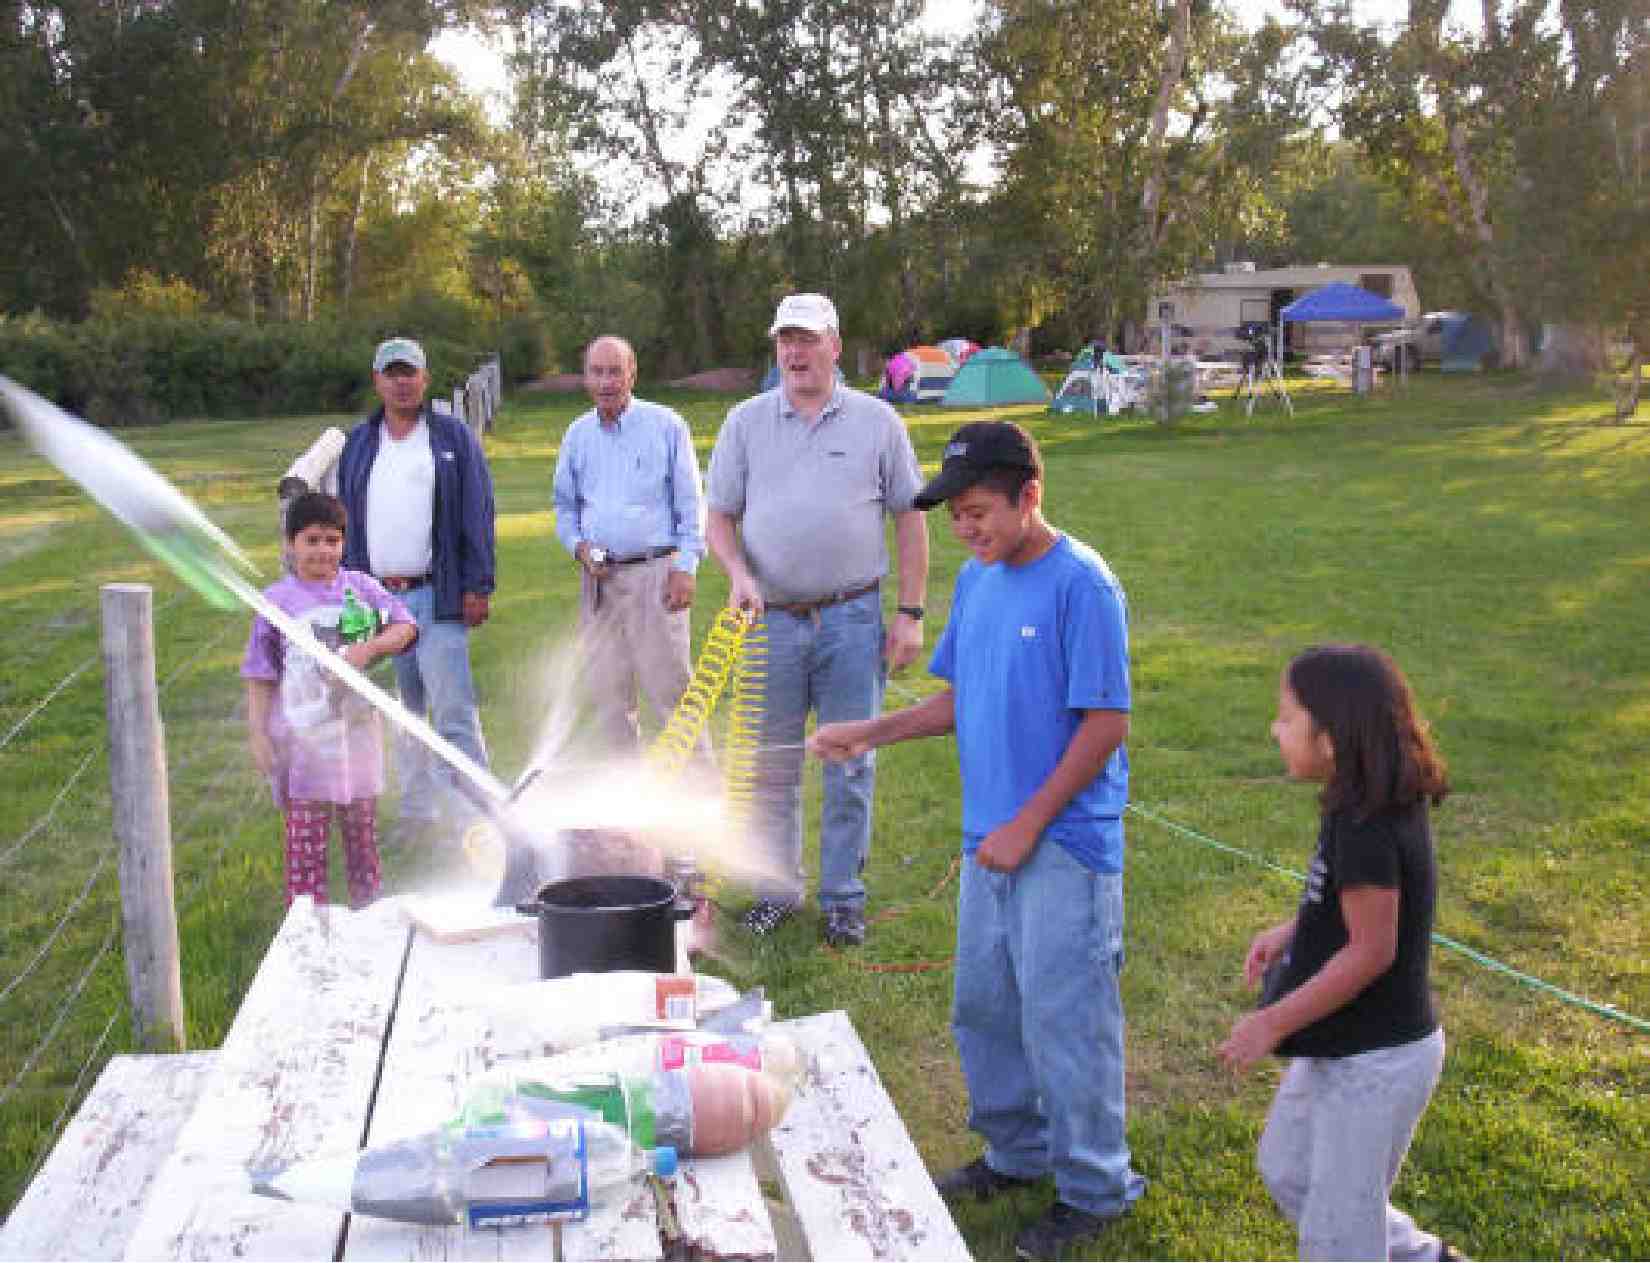 Students and staff at Summer Camp 2006 launching bottle rockets using water.